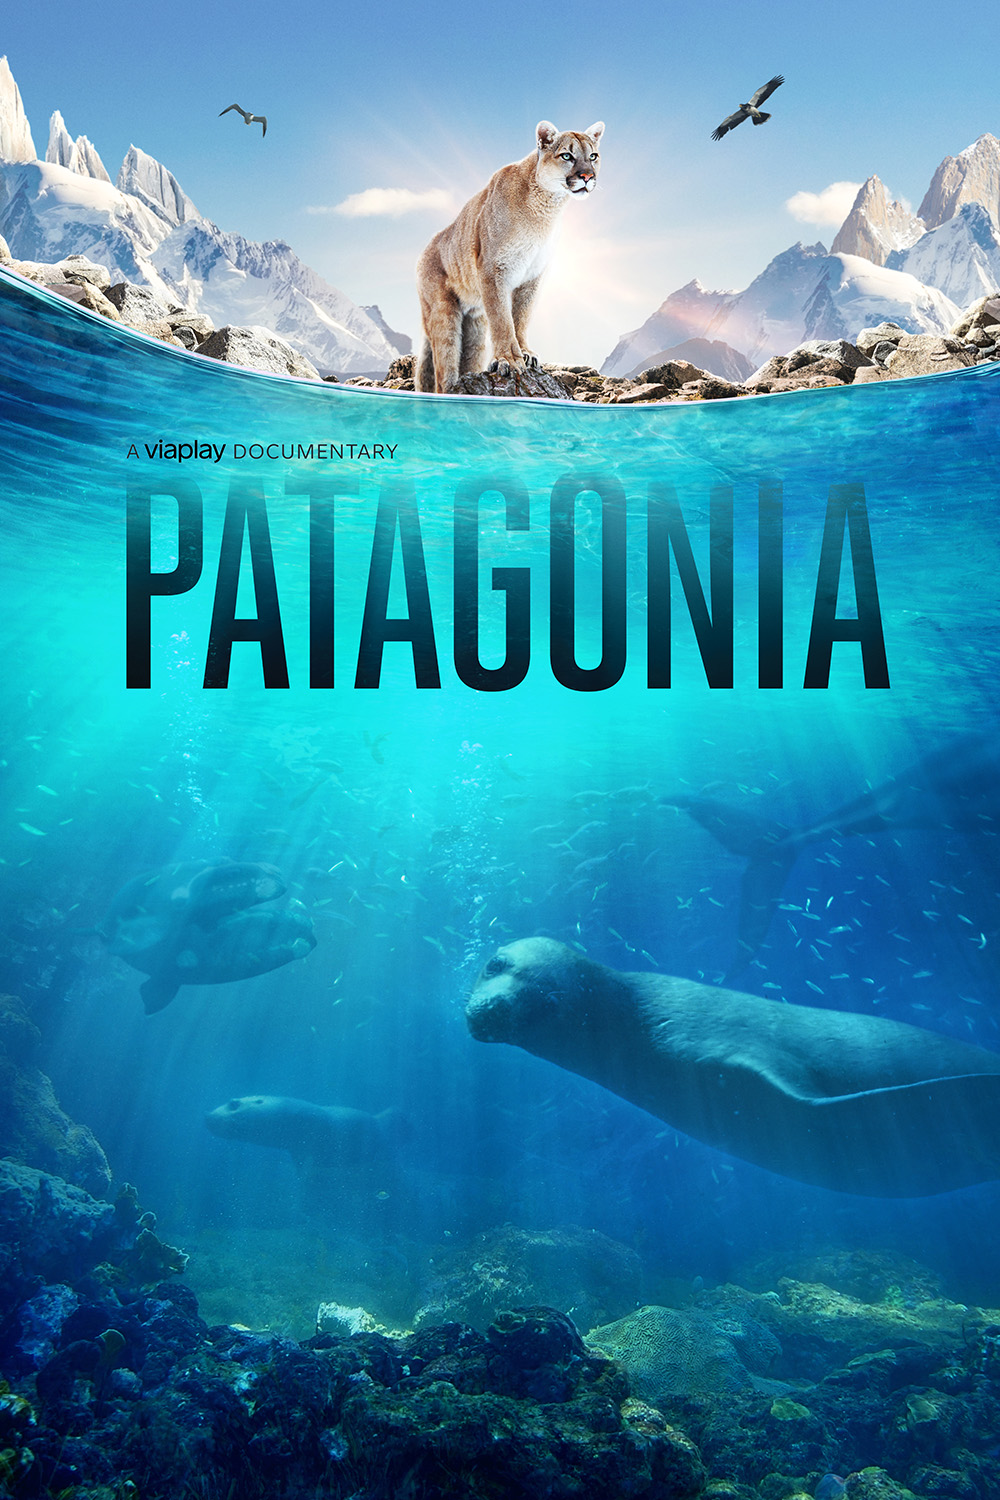 Patagonia: Life on the Edge of the World